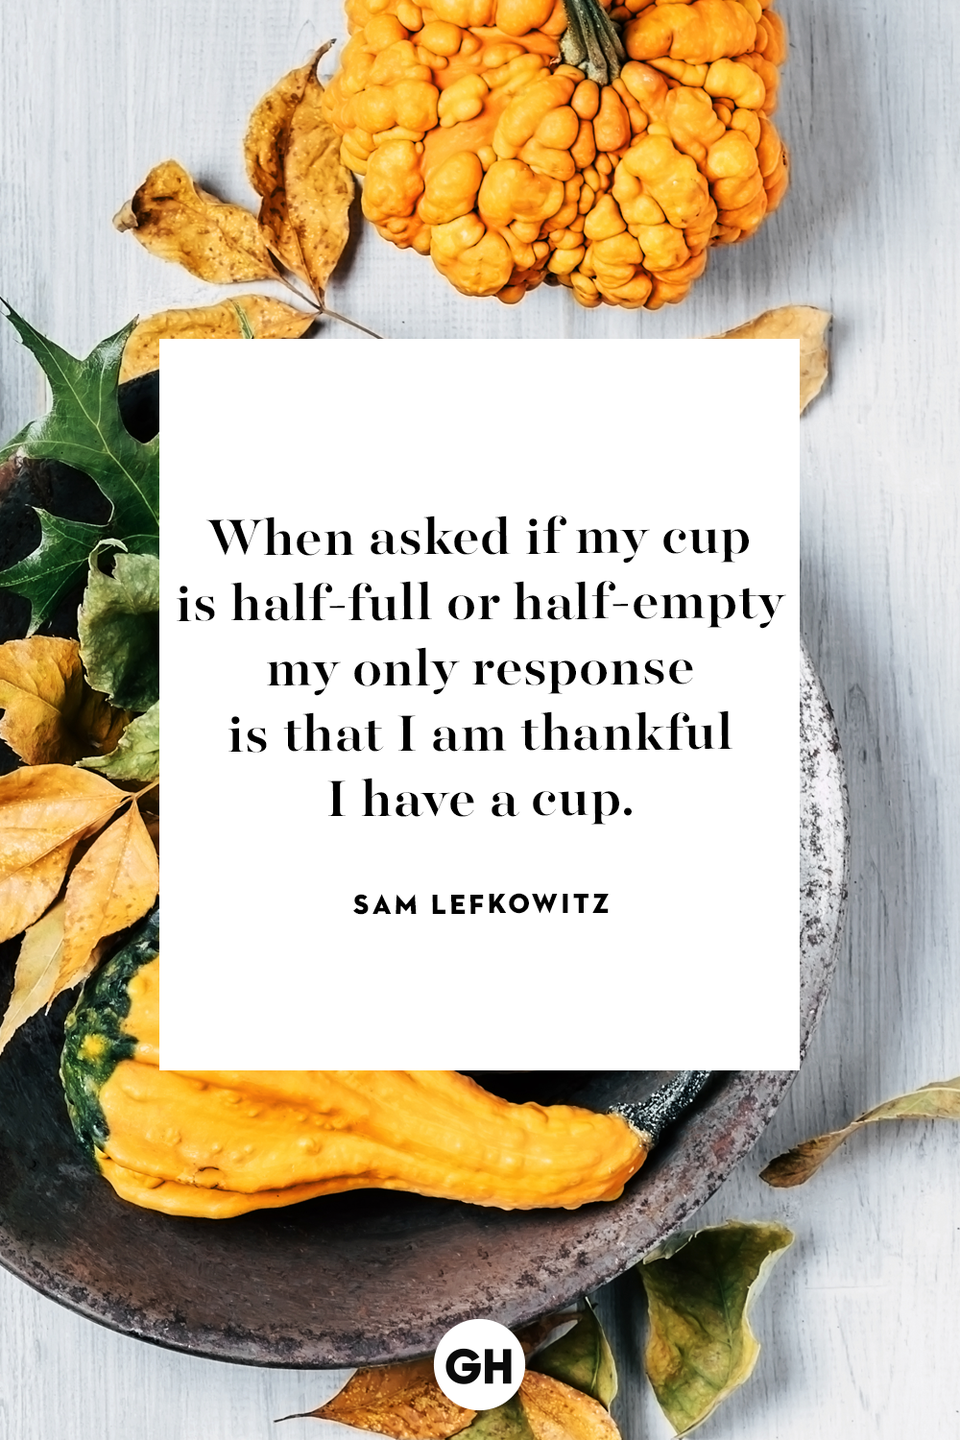 <p>When asked if my cup is half-full or half-empty my only response is that I am thankful I have a cup.</p>